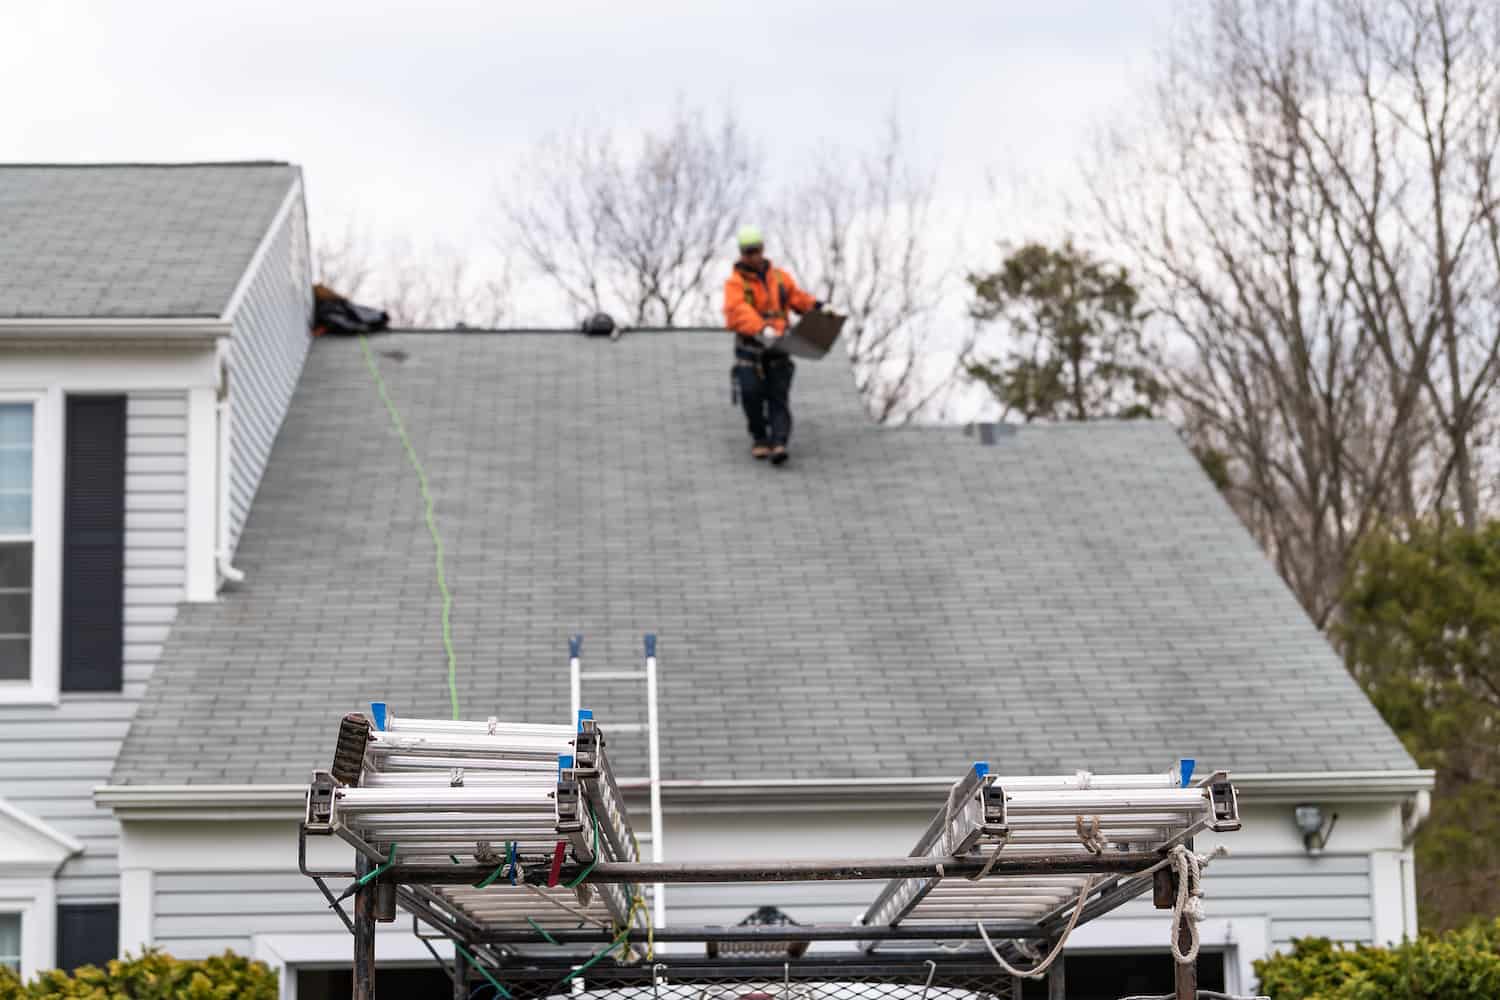 out of focus male worker walking down asphalt shingle roof with tools in hand